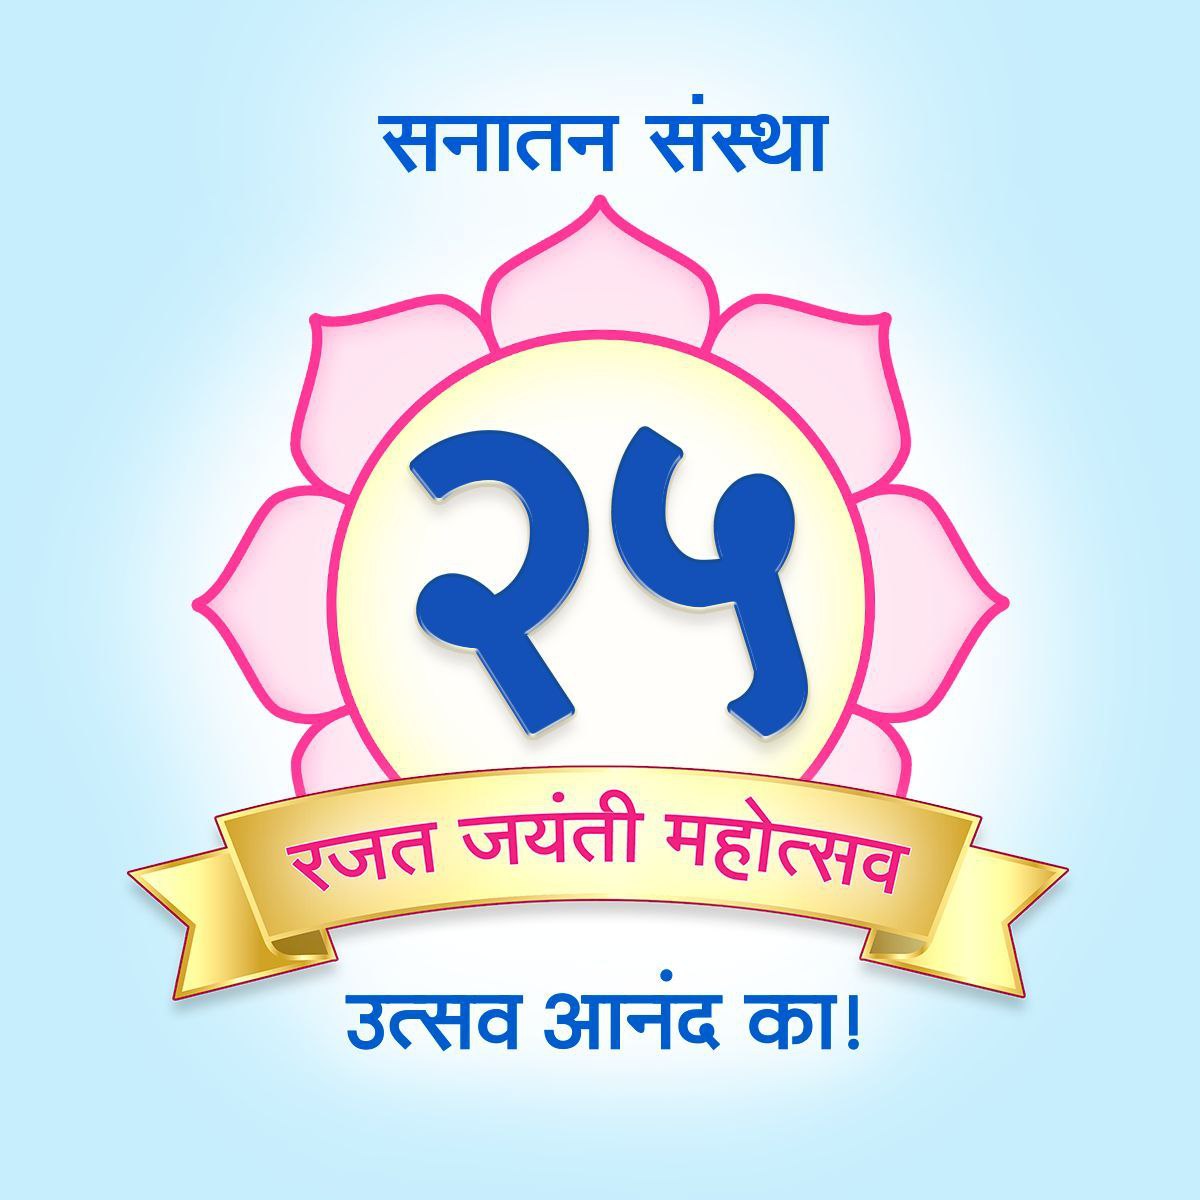 Celebrating #SanatanSanstha_25Years @SanatanSanstha teaching you, how to find joy in a stressful life... Please find the way towards blissful life with the help of @SanatanSanstha @RohitMamidwar @5Foot13in